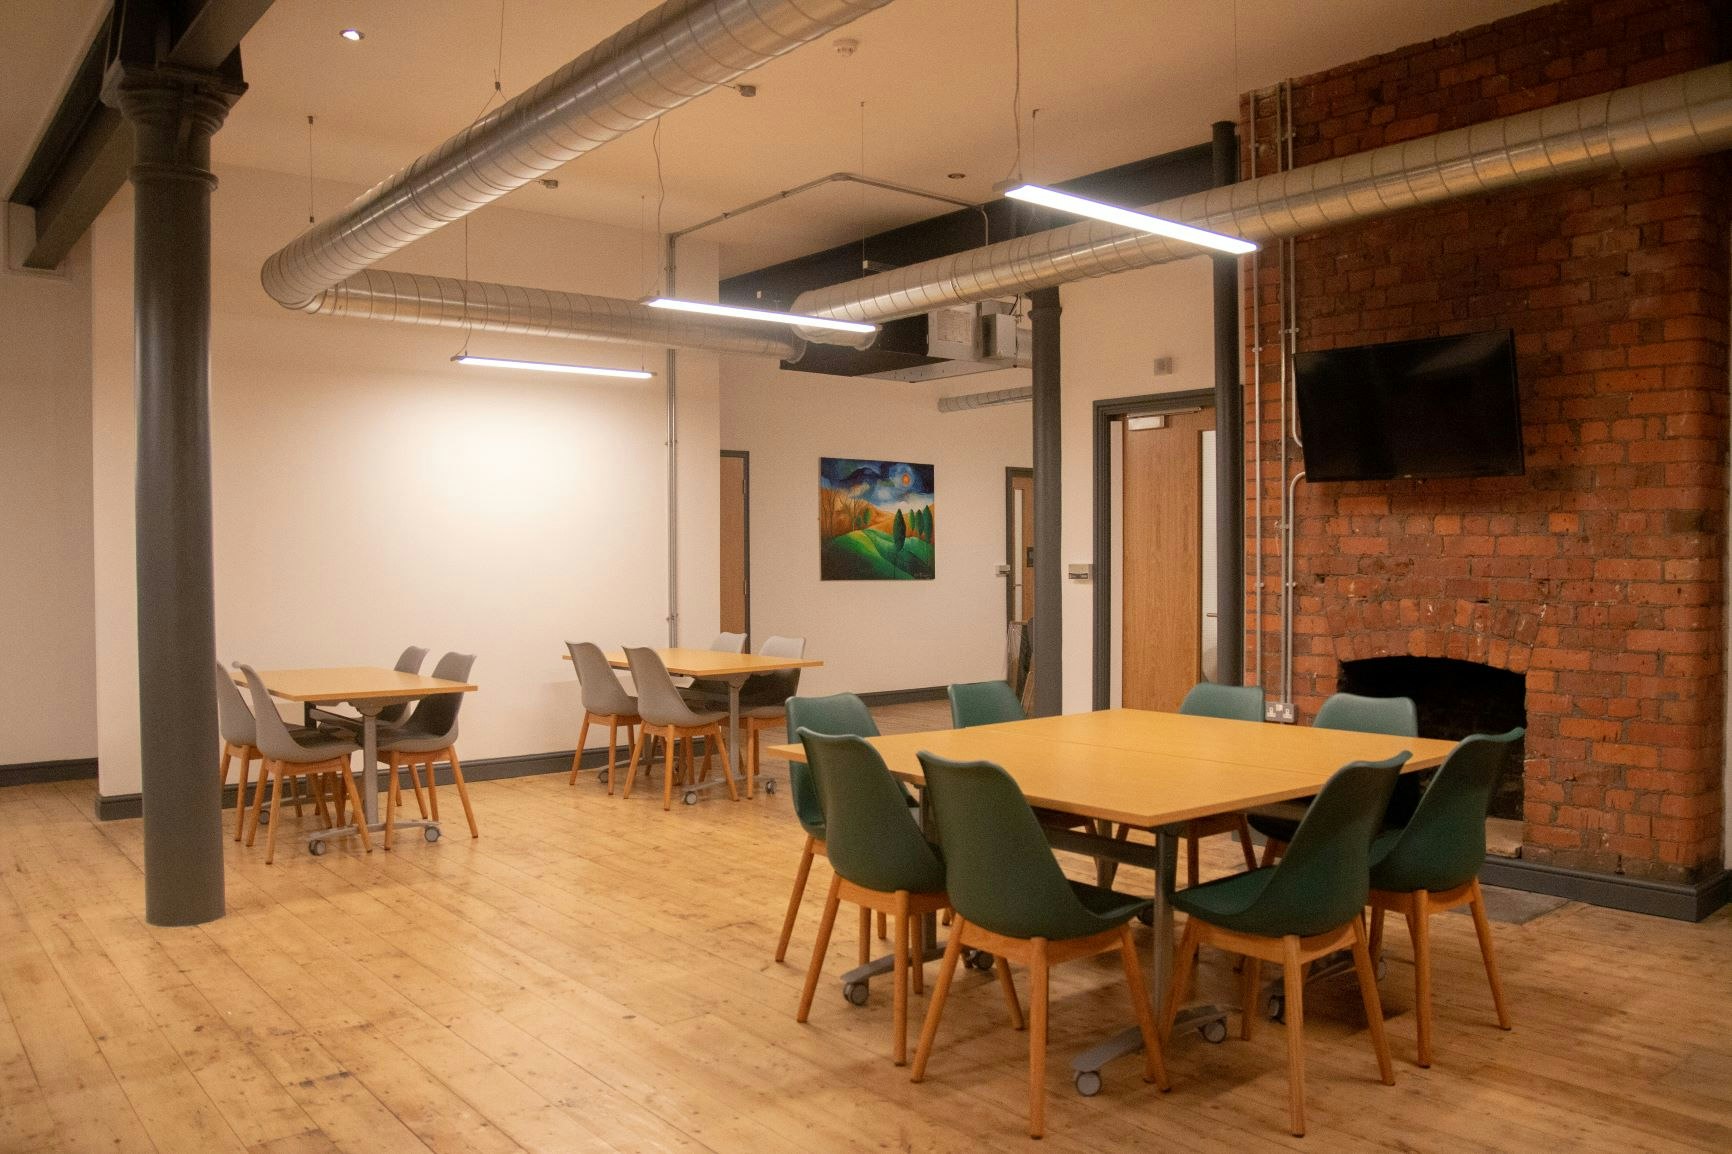 Creative Spaces Venues in Manchester - Creative Together, Swan Buildings